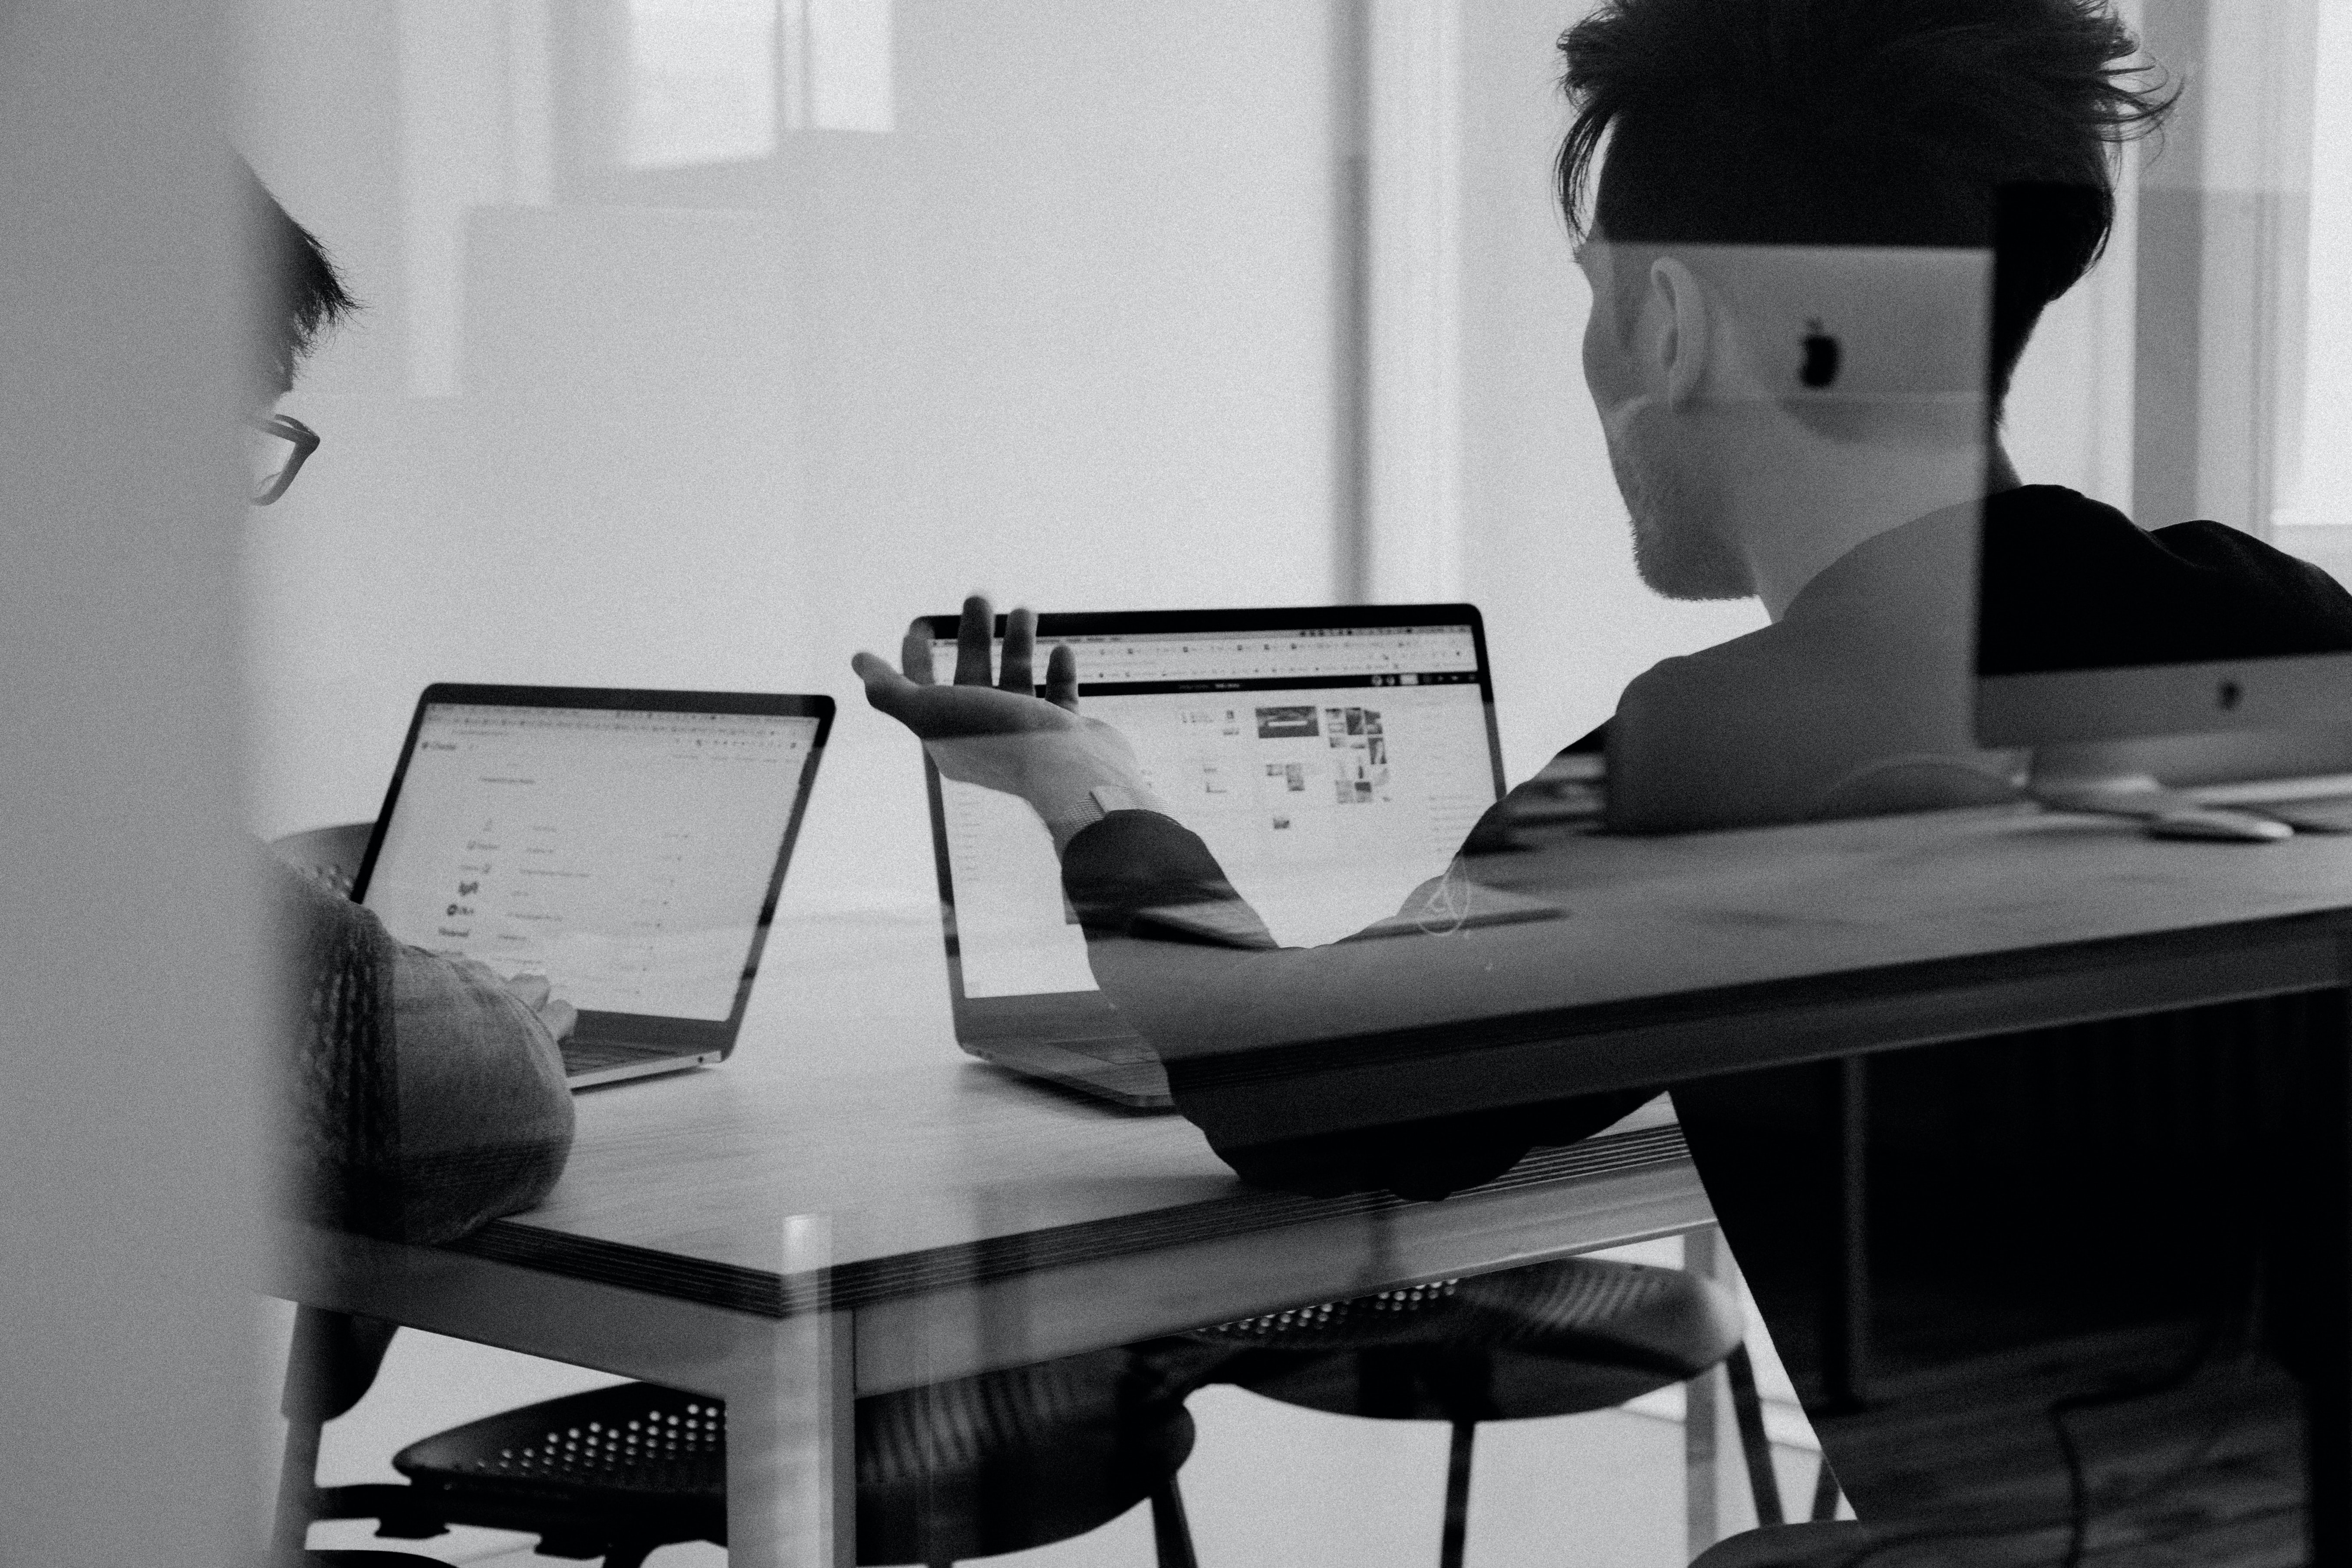 Two people discussing in front of laptops in black and white